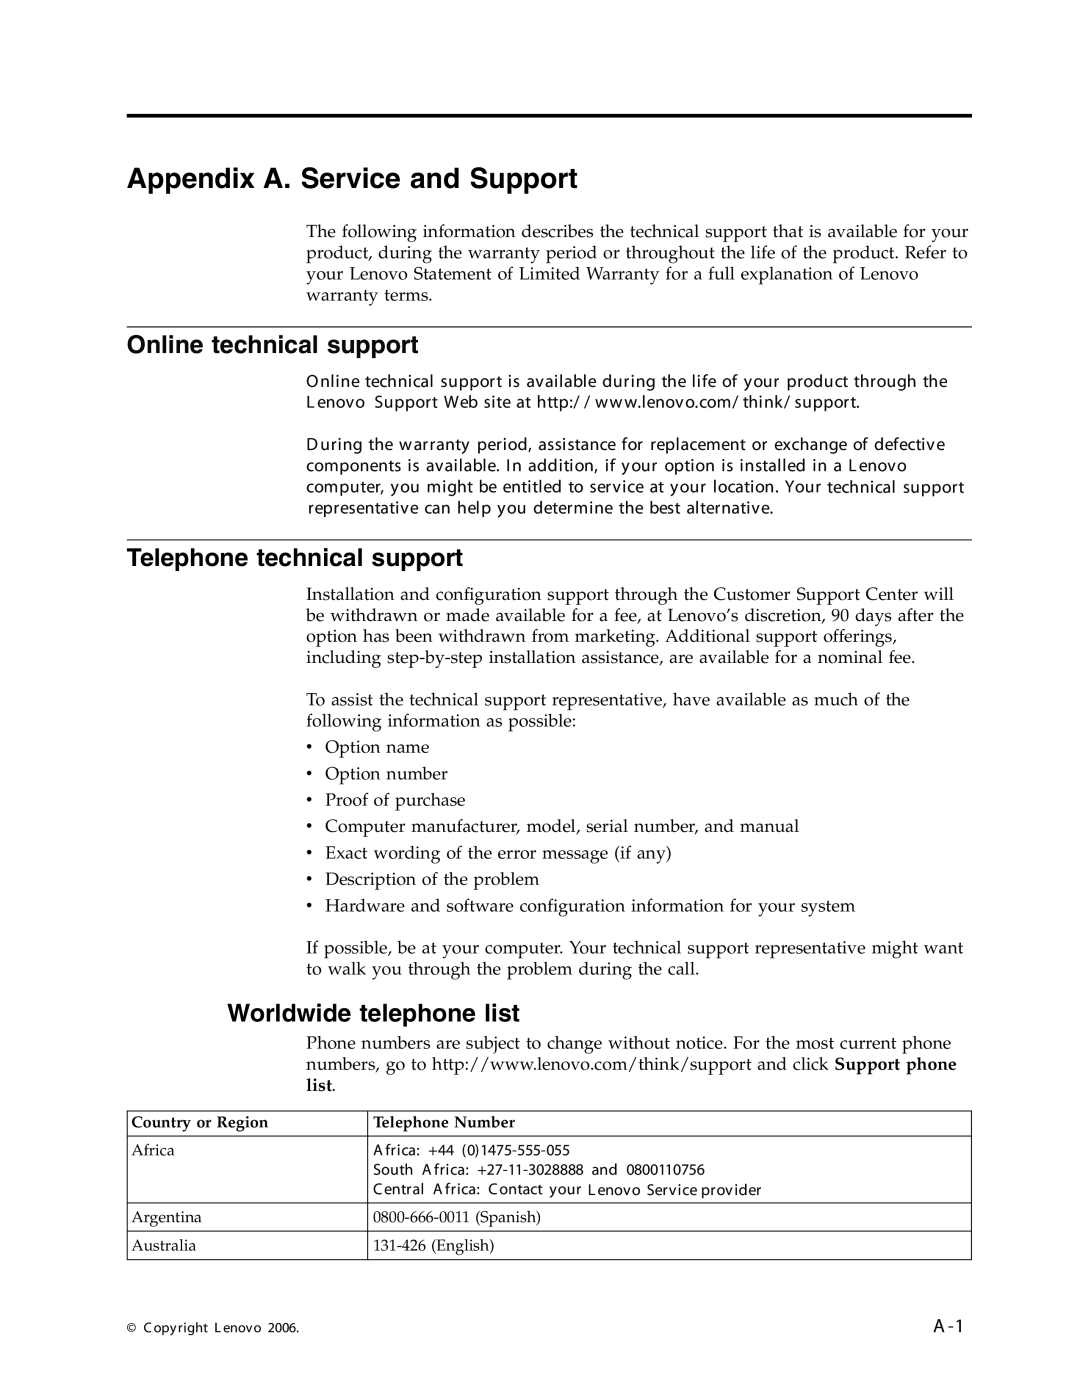 Lenovo L191 manual Appendix A. Service and Support, Online technical support, Telephone technical support 